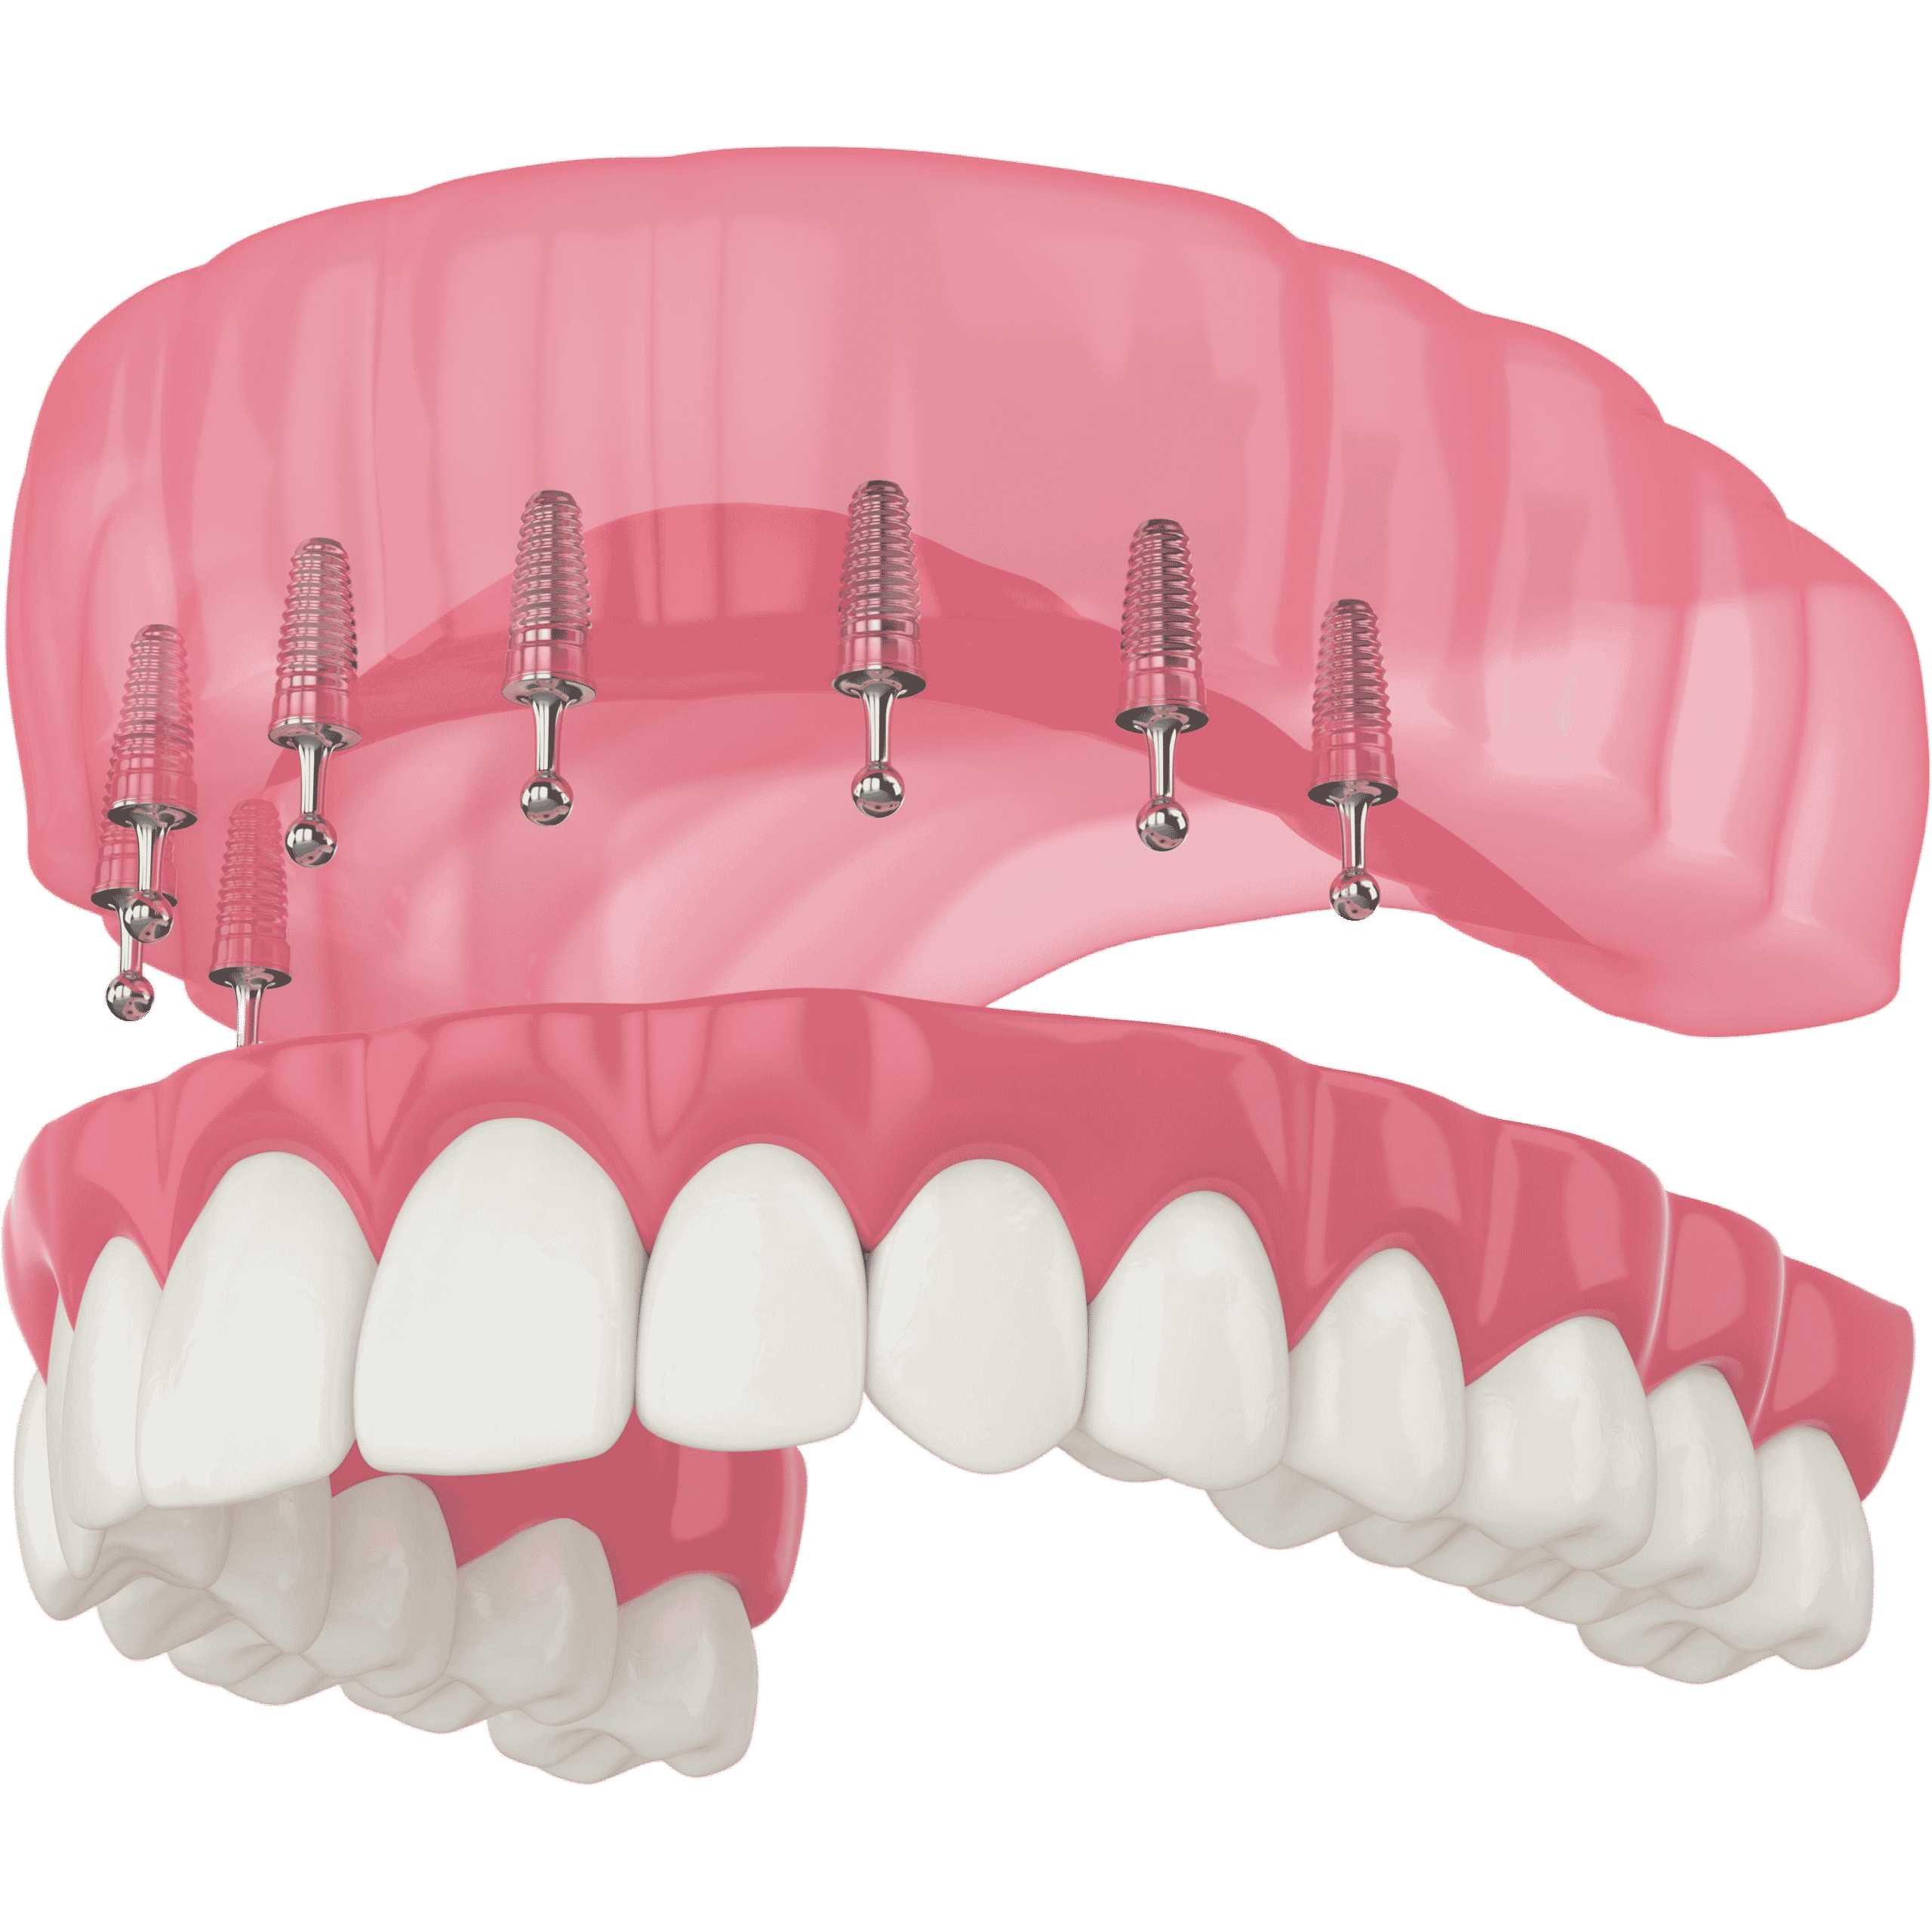 If you are missing a full arch of teeth, you may be a candidate for our implant-supported dentures. This treatment combines the stability of dental implants with the convenience of dentures, so you can enjoy a beautiful and functional smile.